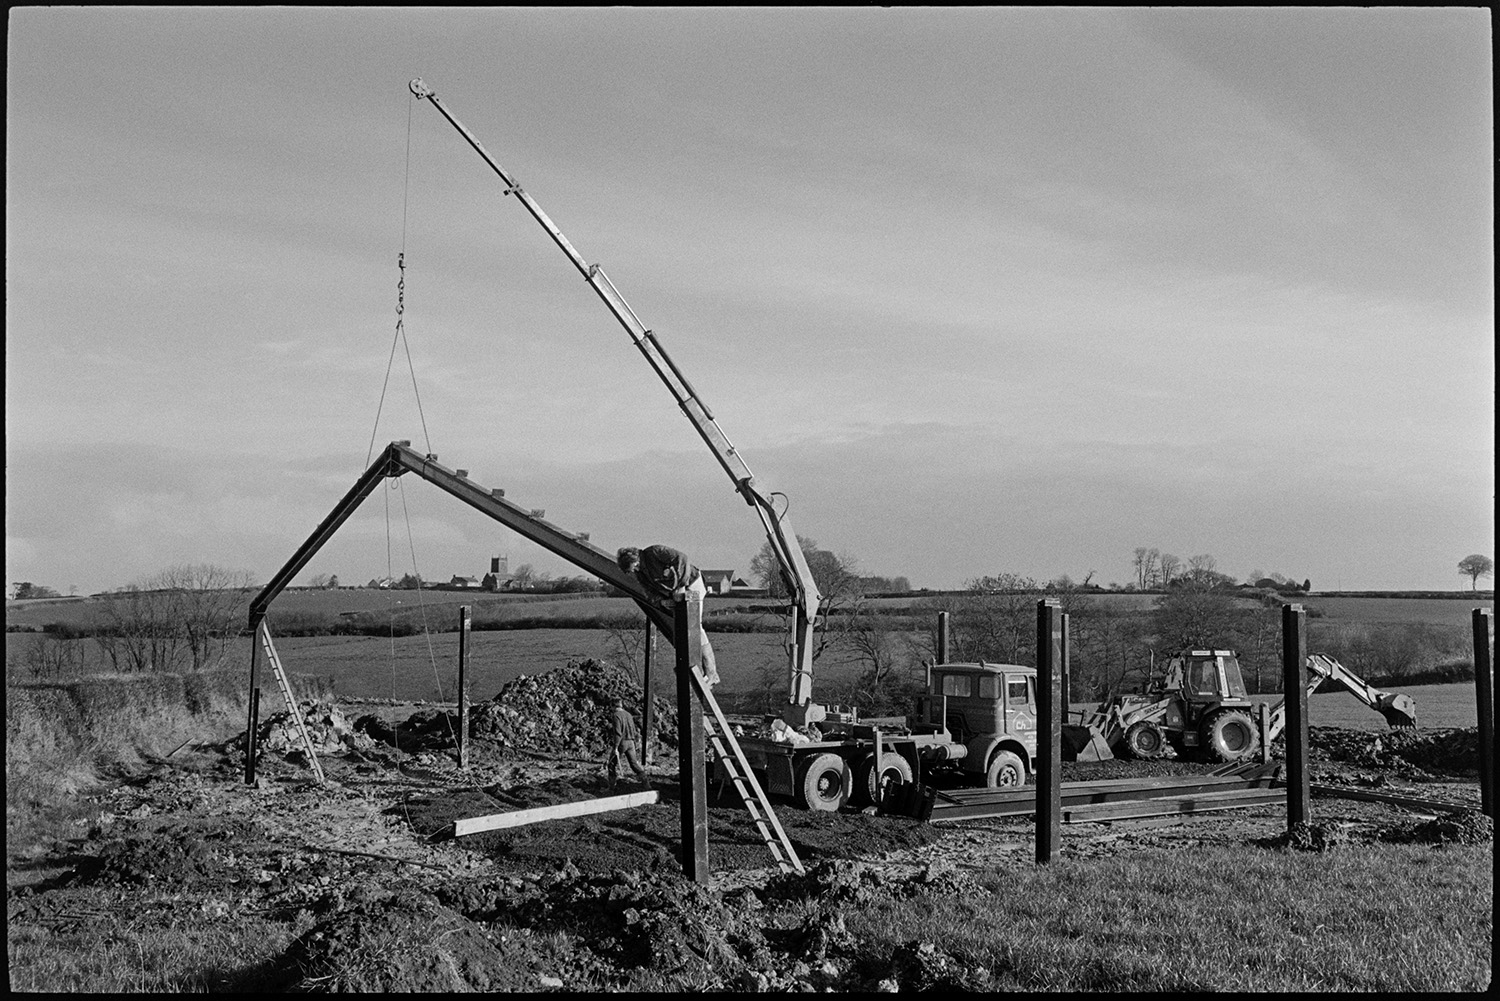 Crane erecting new barn in field. 
[A crane putting up the metal frame of a barn in a field at Ashreigney. A person is up a ladder fixing the frame together. A digger is in the background and a church tower and other buildings can be seen on the horizon.]